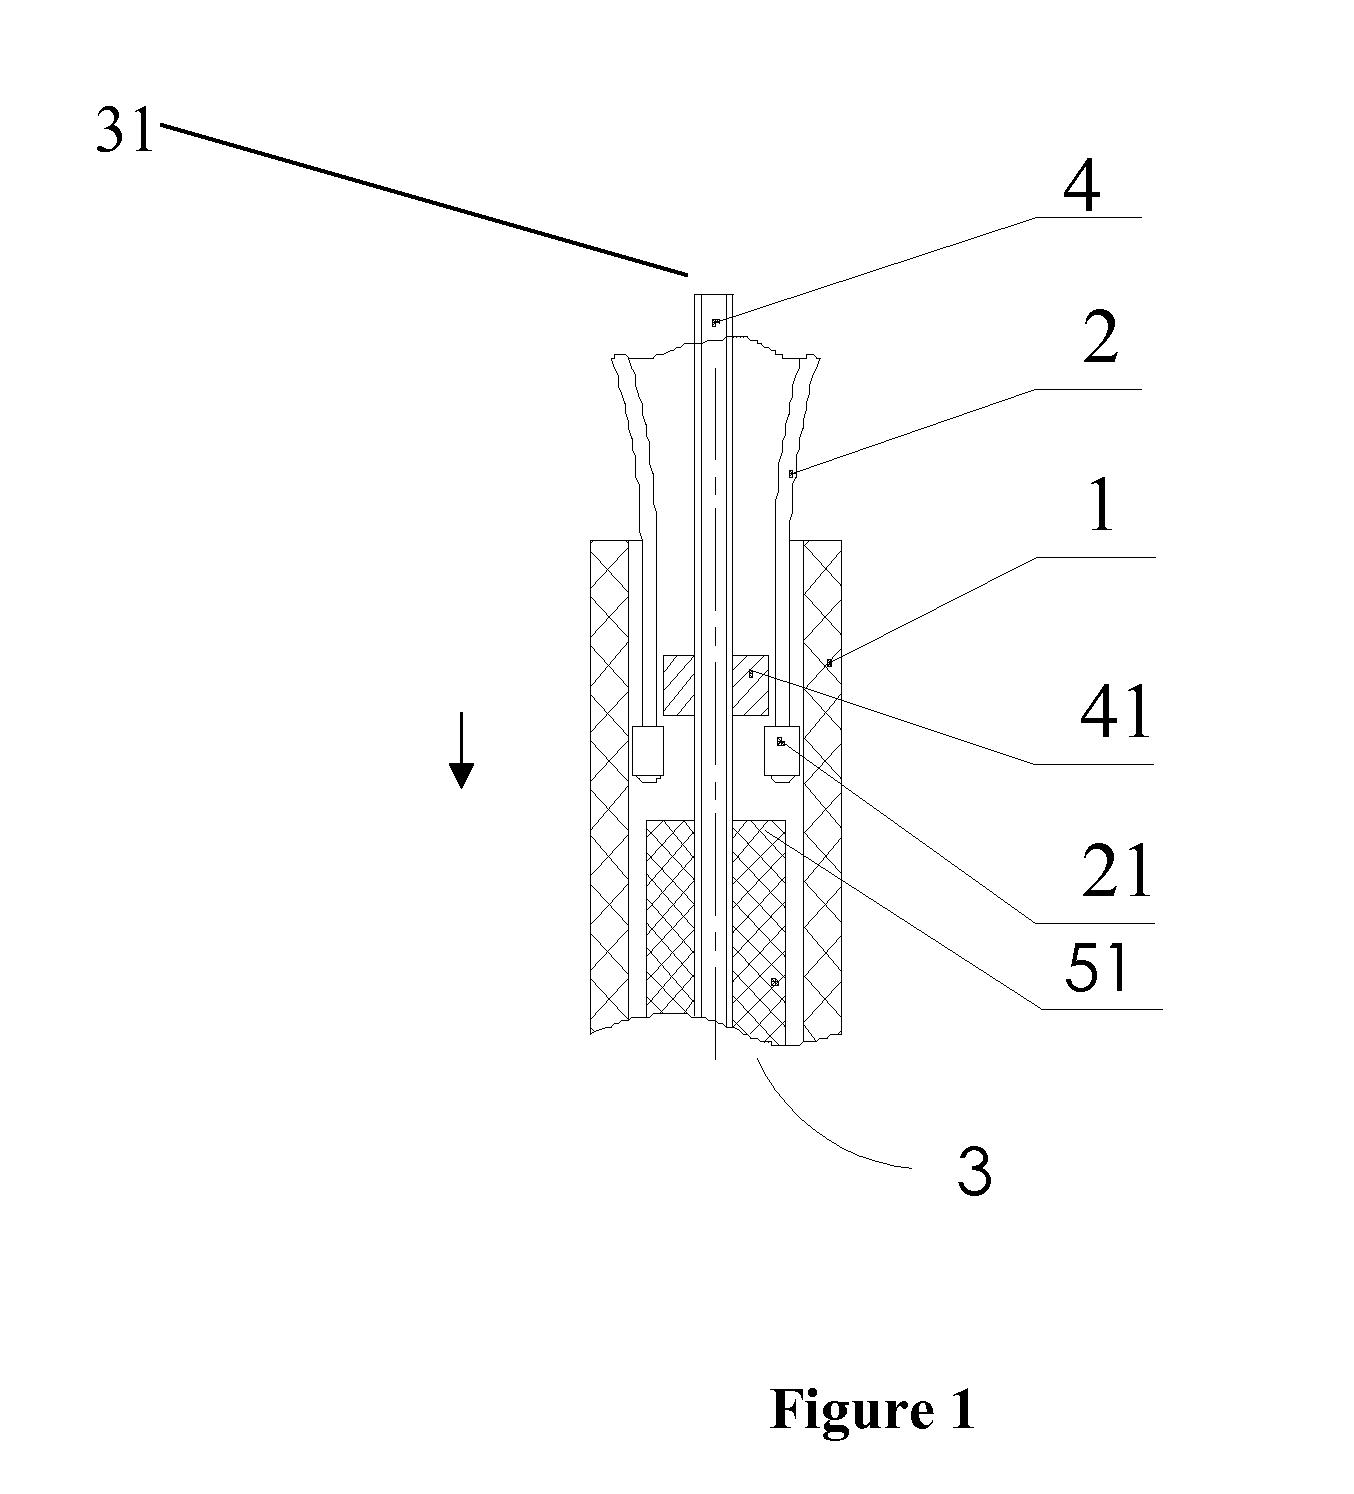 Delivery apparatus for a retractable self expanding neurovascular stent